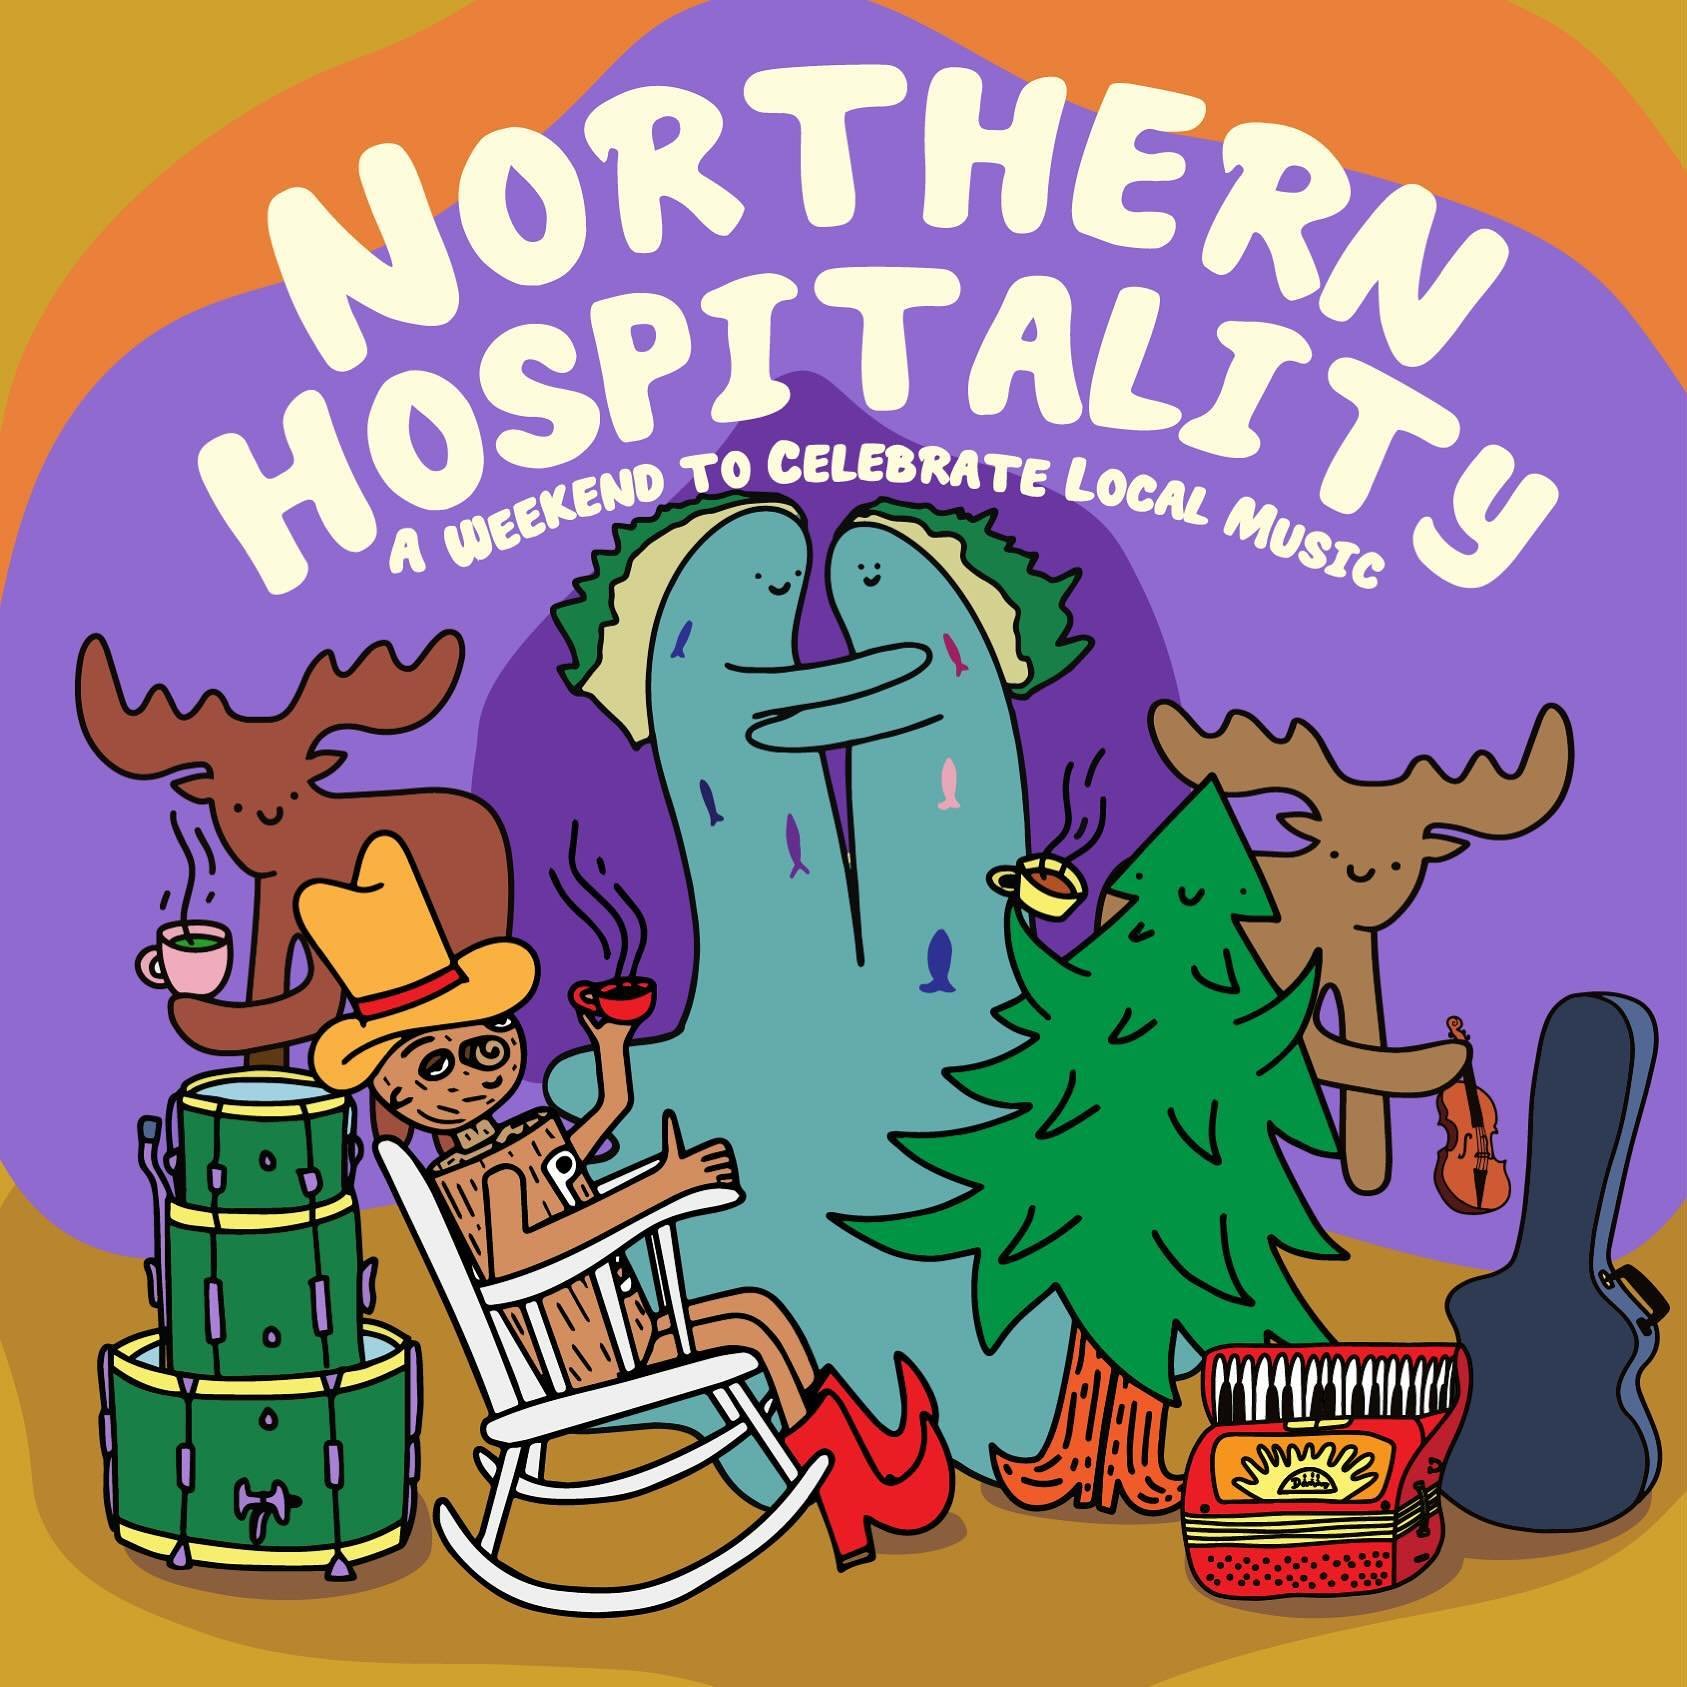 Photorealistic-style illustrations for the Northern Hospitality Poster. Colour and layout by @dannybellmusic because we value collaboration. 

Event is May 24th and 25th at @knoxcentrepg
Check out @dannybellmusic or @studio_2880 for more details.